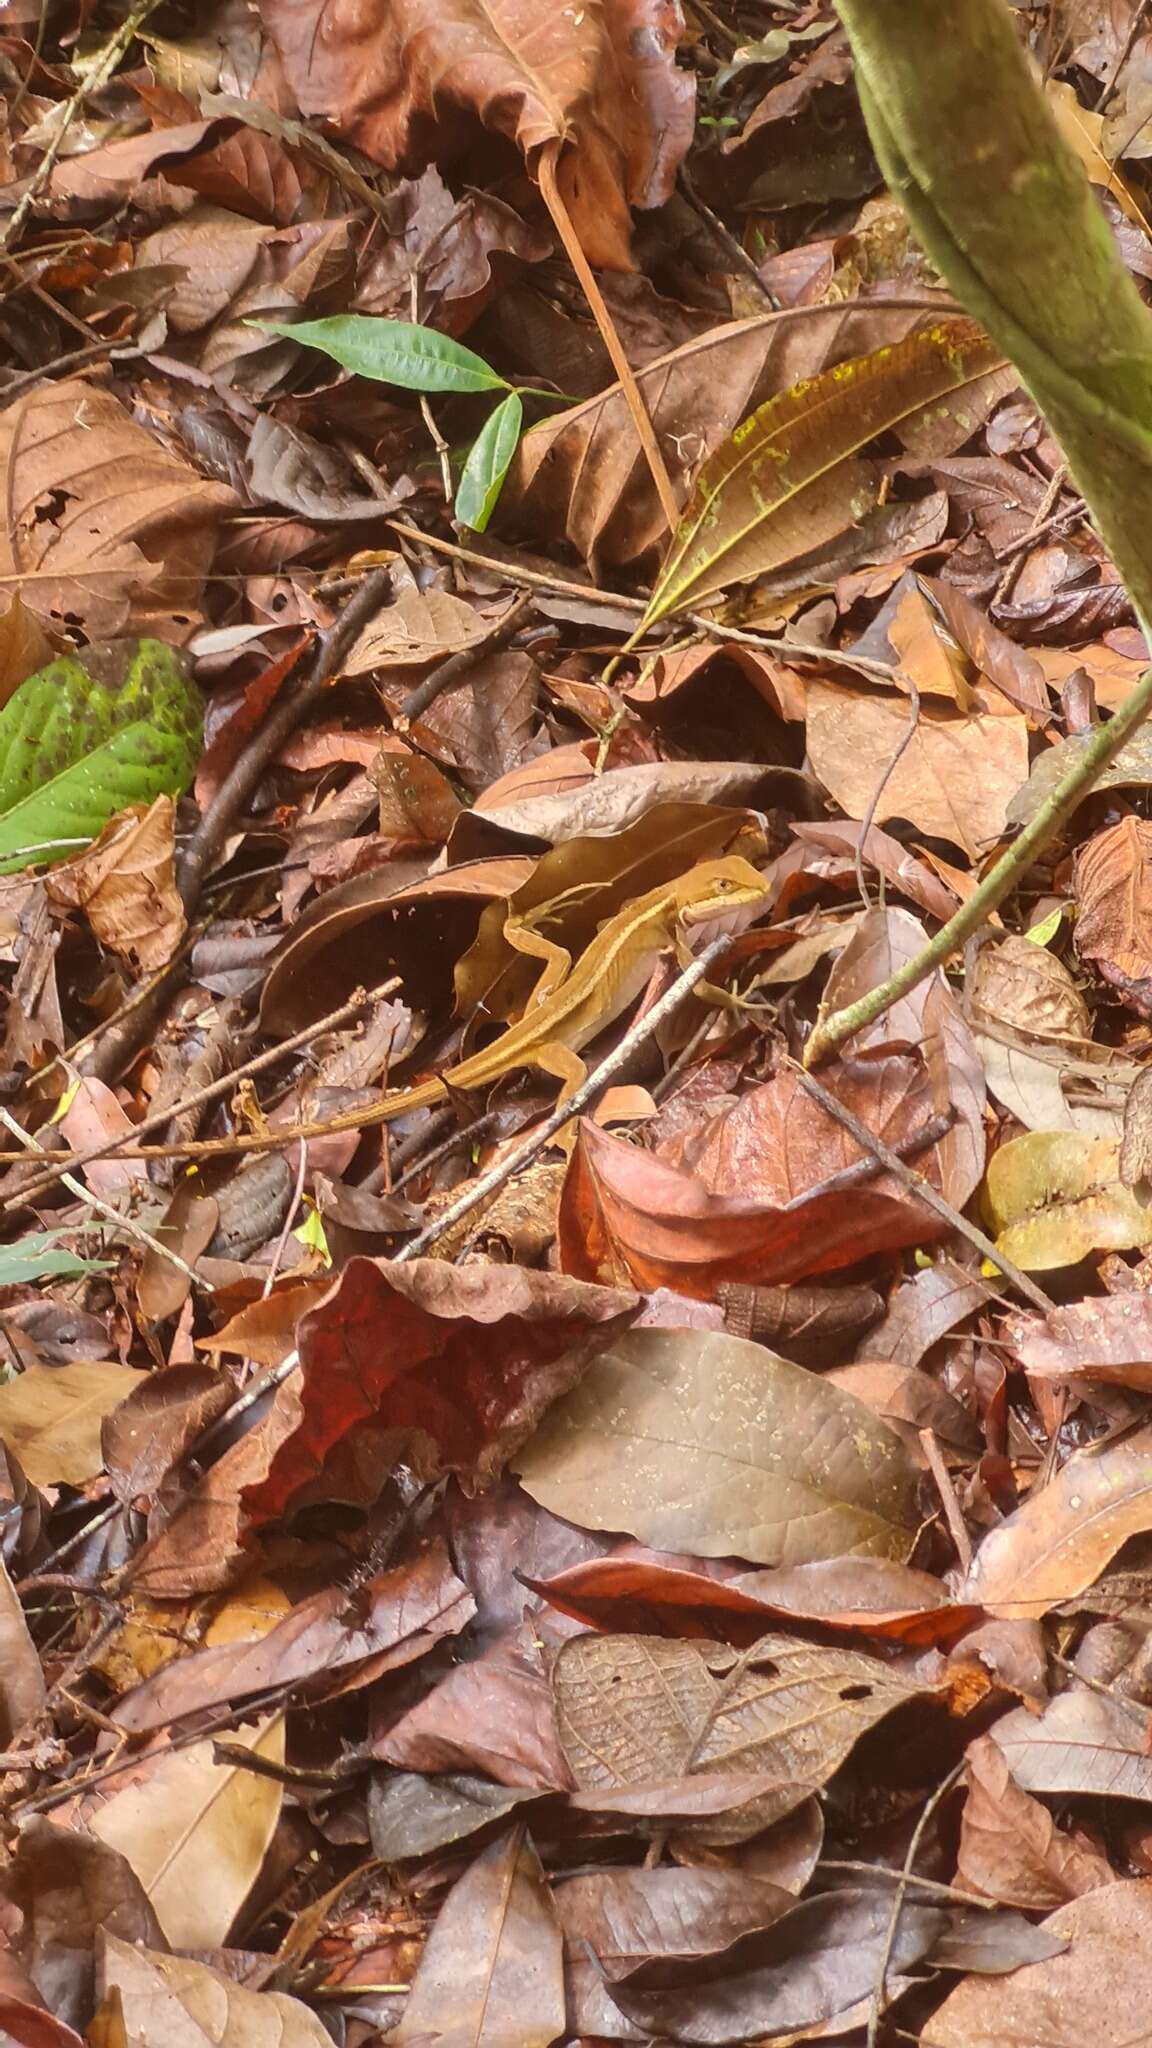 Image of Two-lined Fathead Anole